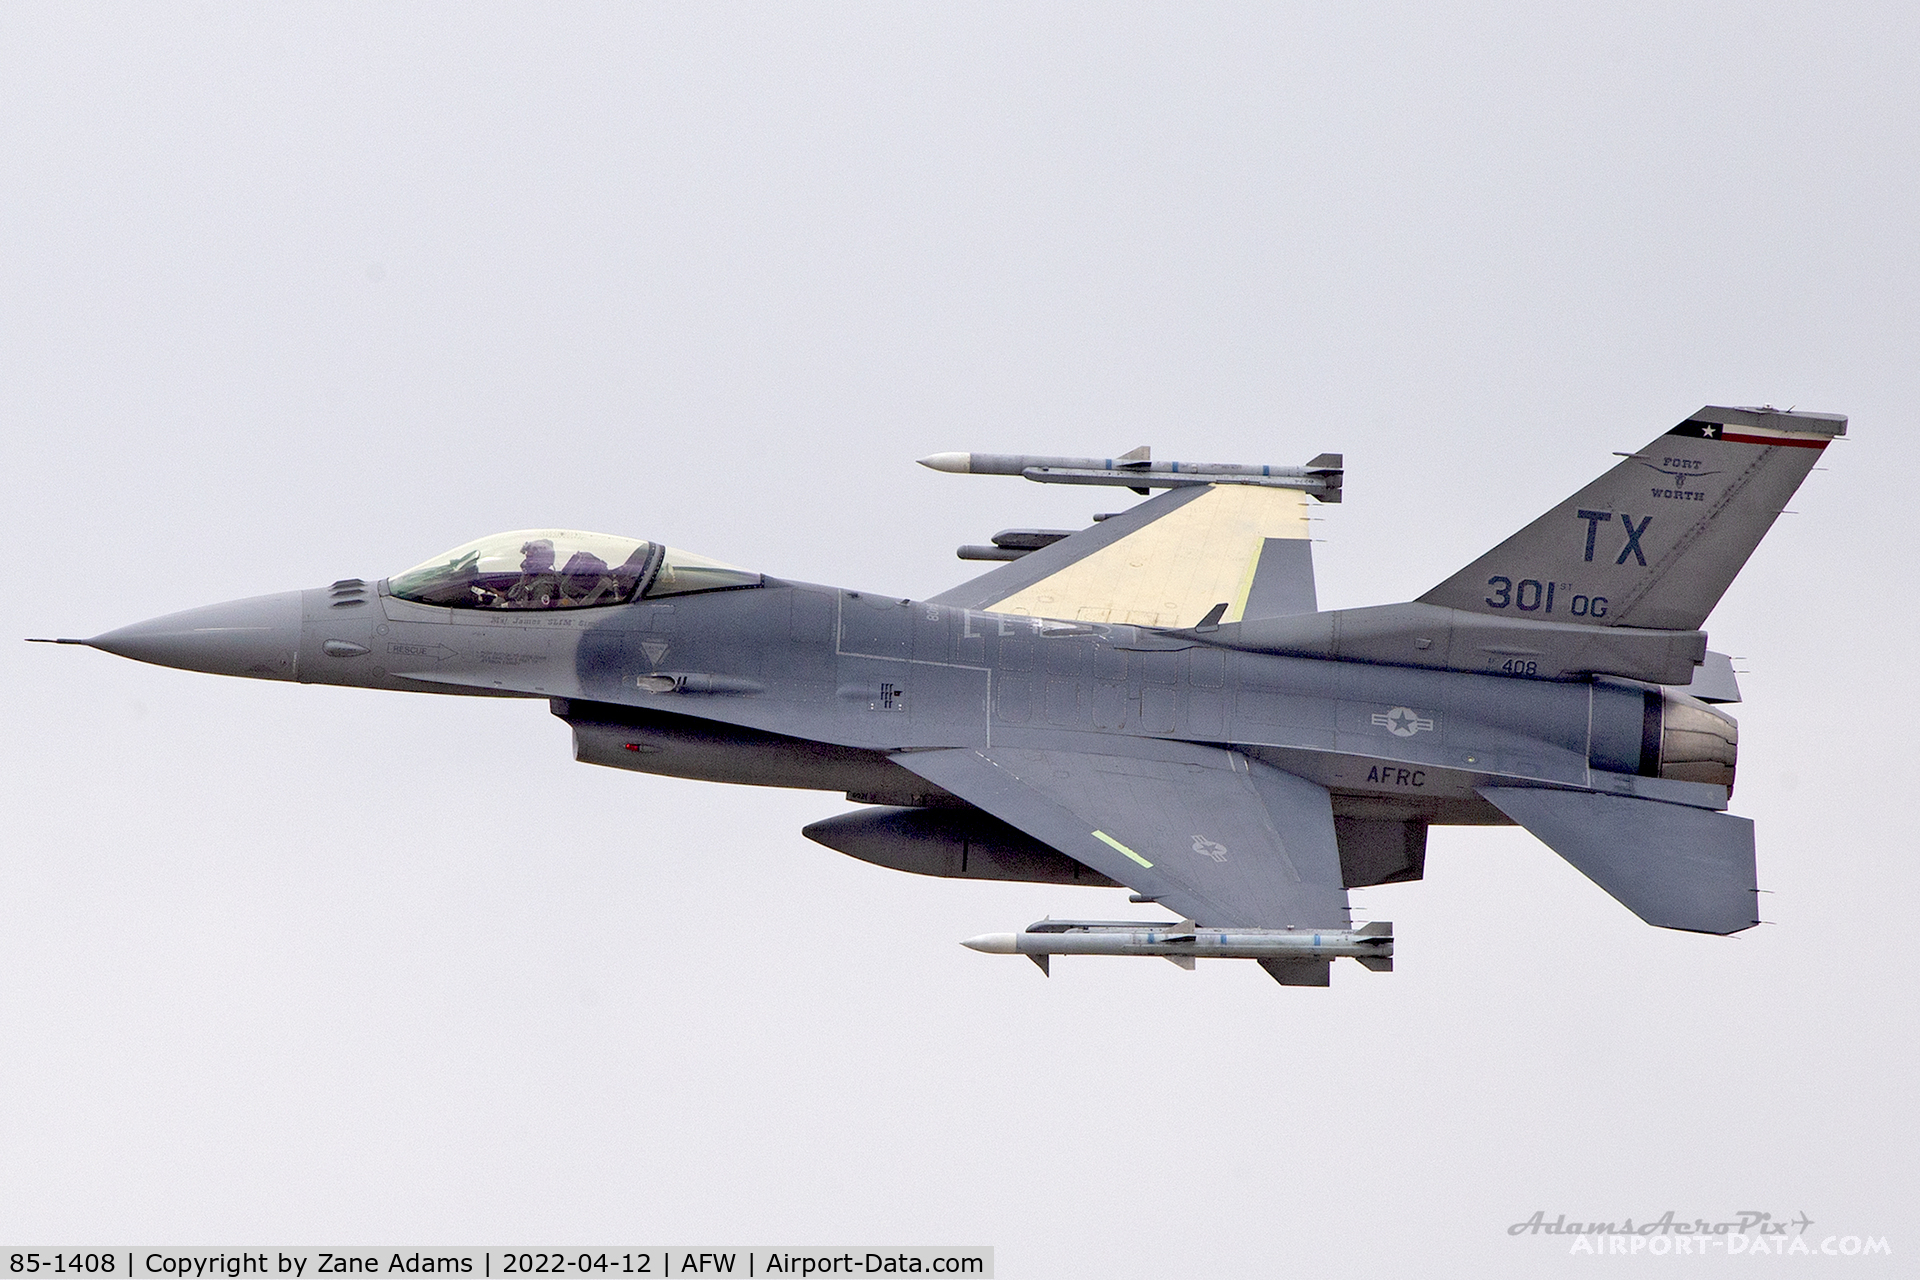 85-1408, 1985 General Dynamics F-16C Fighting Falcon C/N 5C-188, 301ST F-16 departing Alliance Airport, Fort Worth, TX